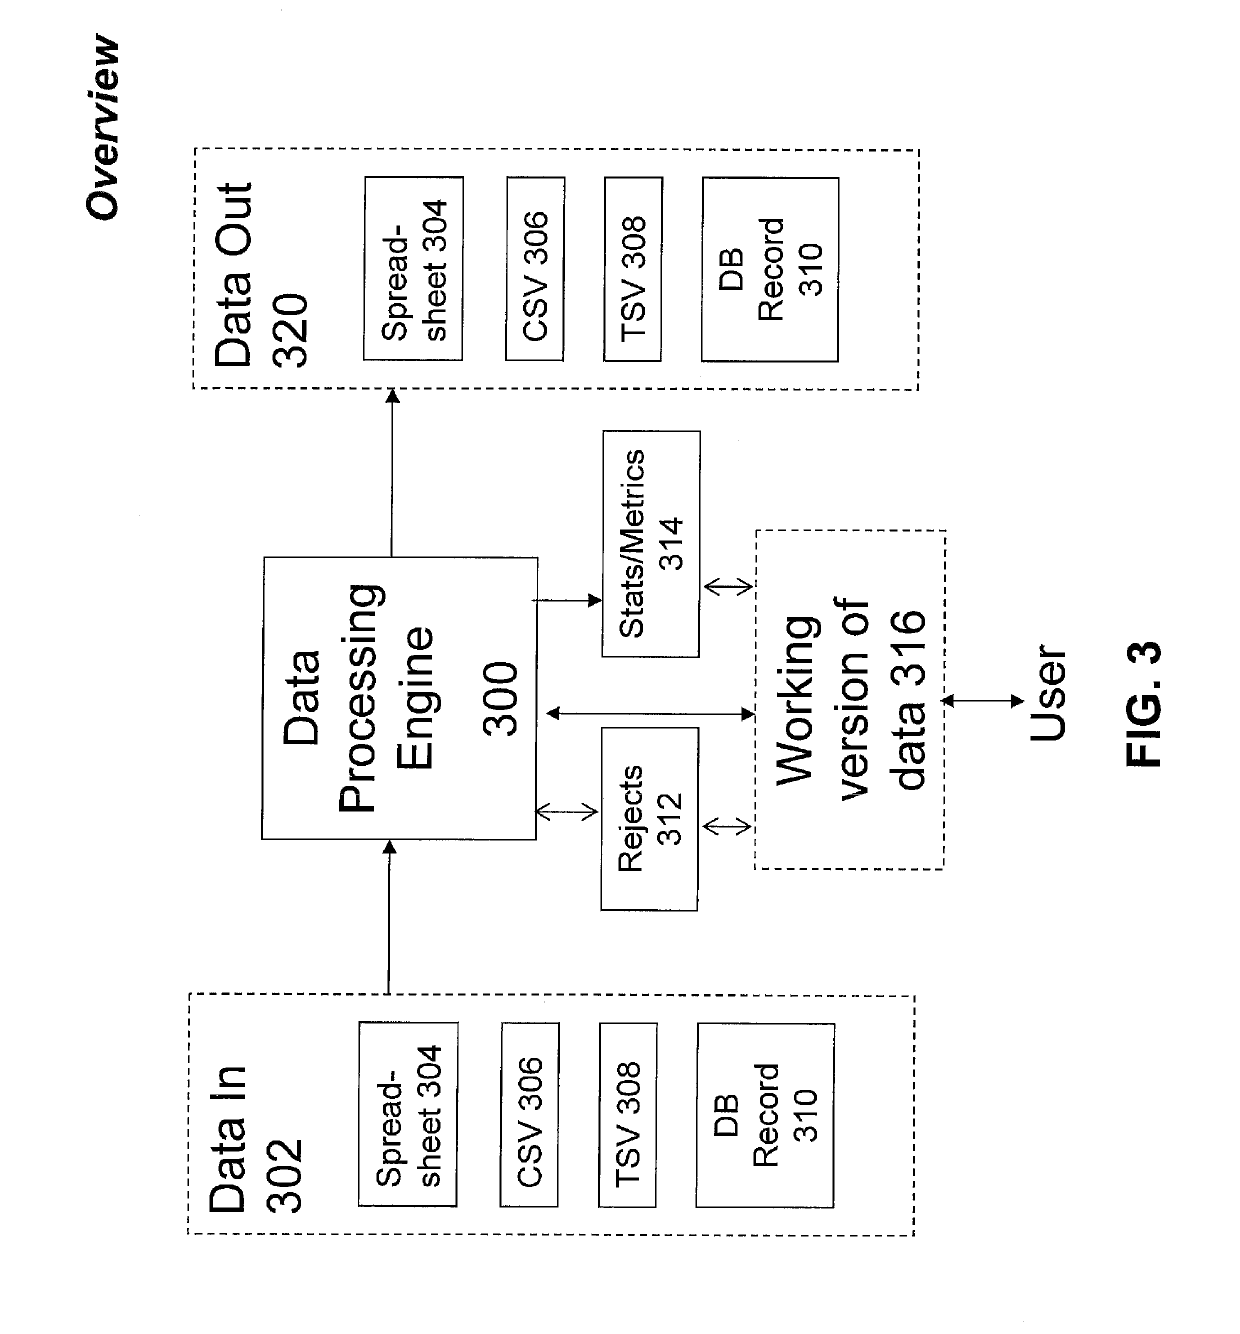 Methods and apparatus for integrated management of structured data from various sources and having various formats